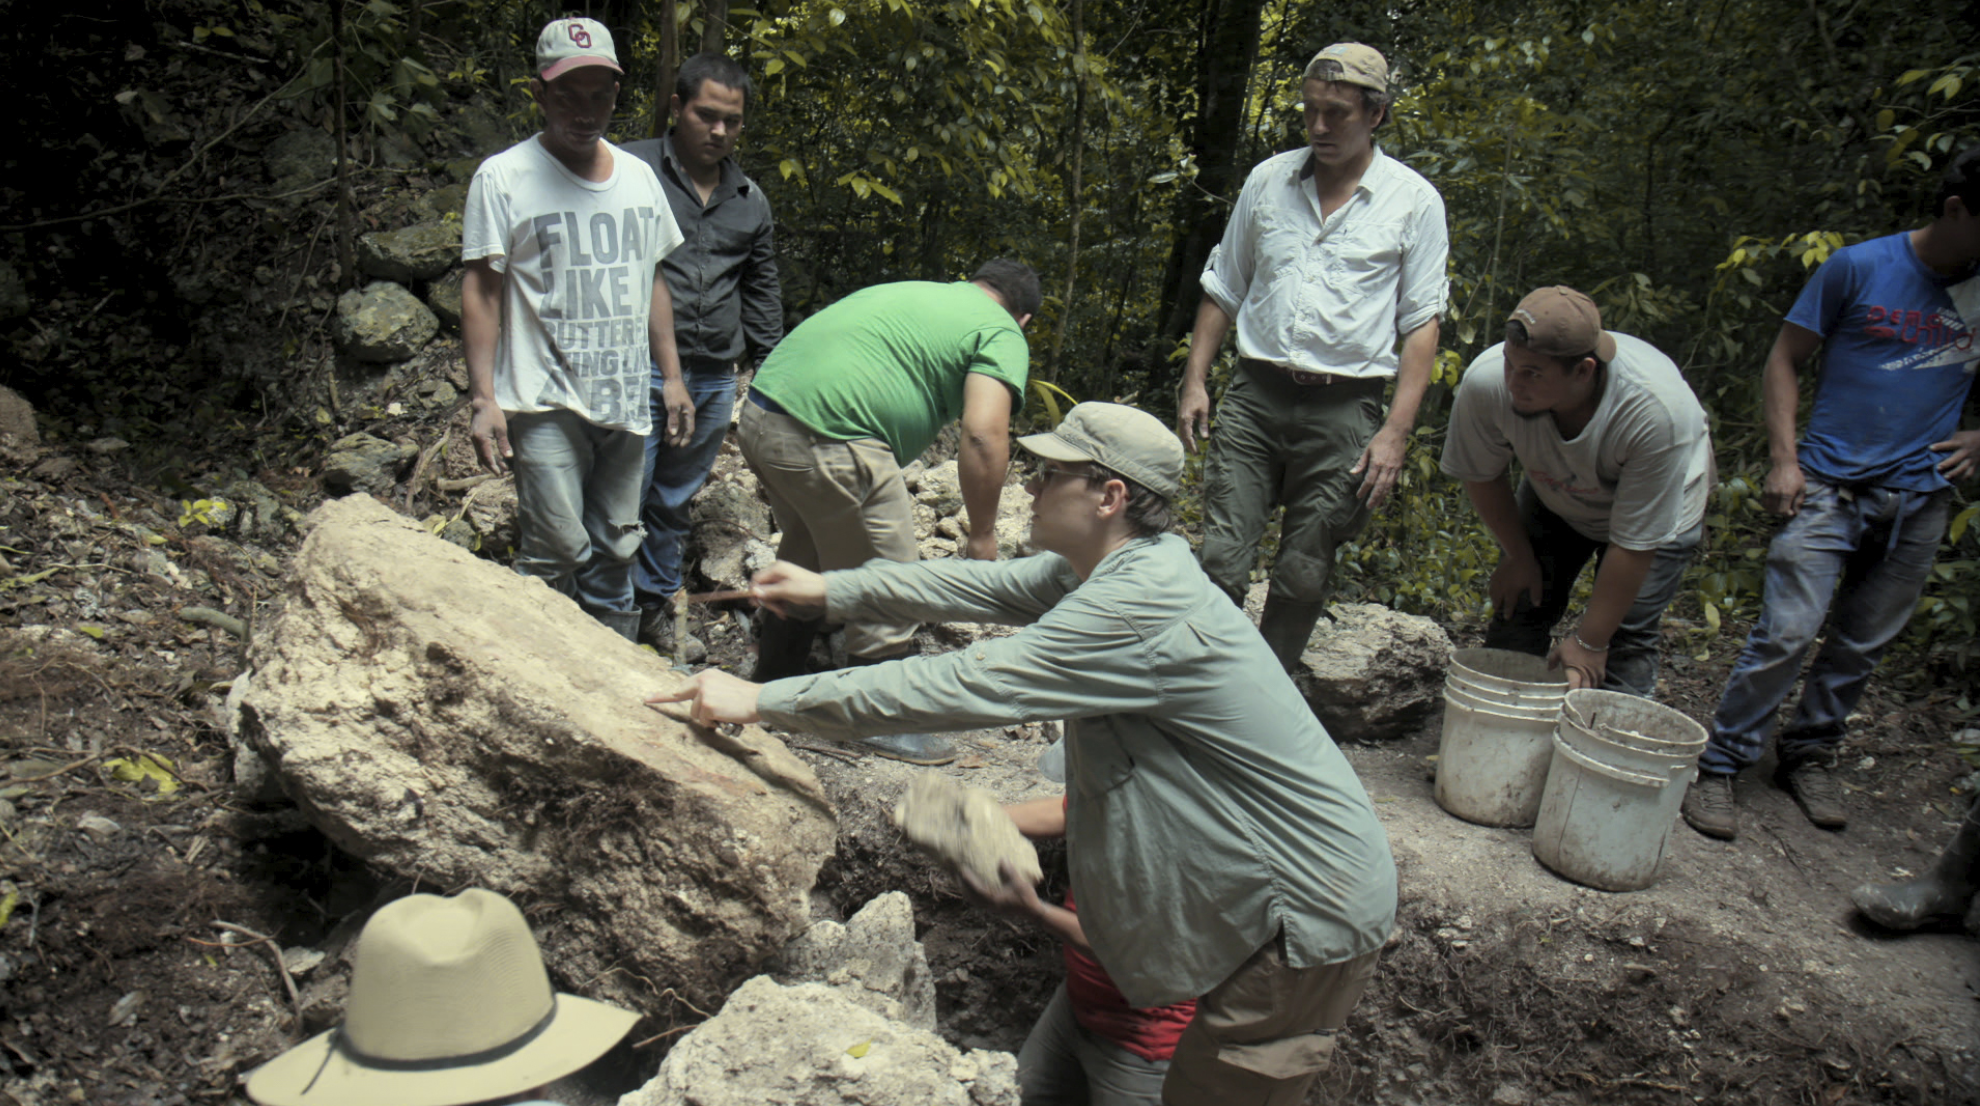 Photo from National Geographic’s four-part series “Lost Treasures of the Maya”